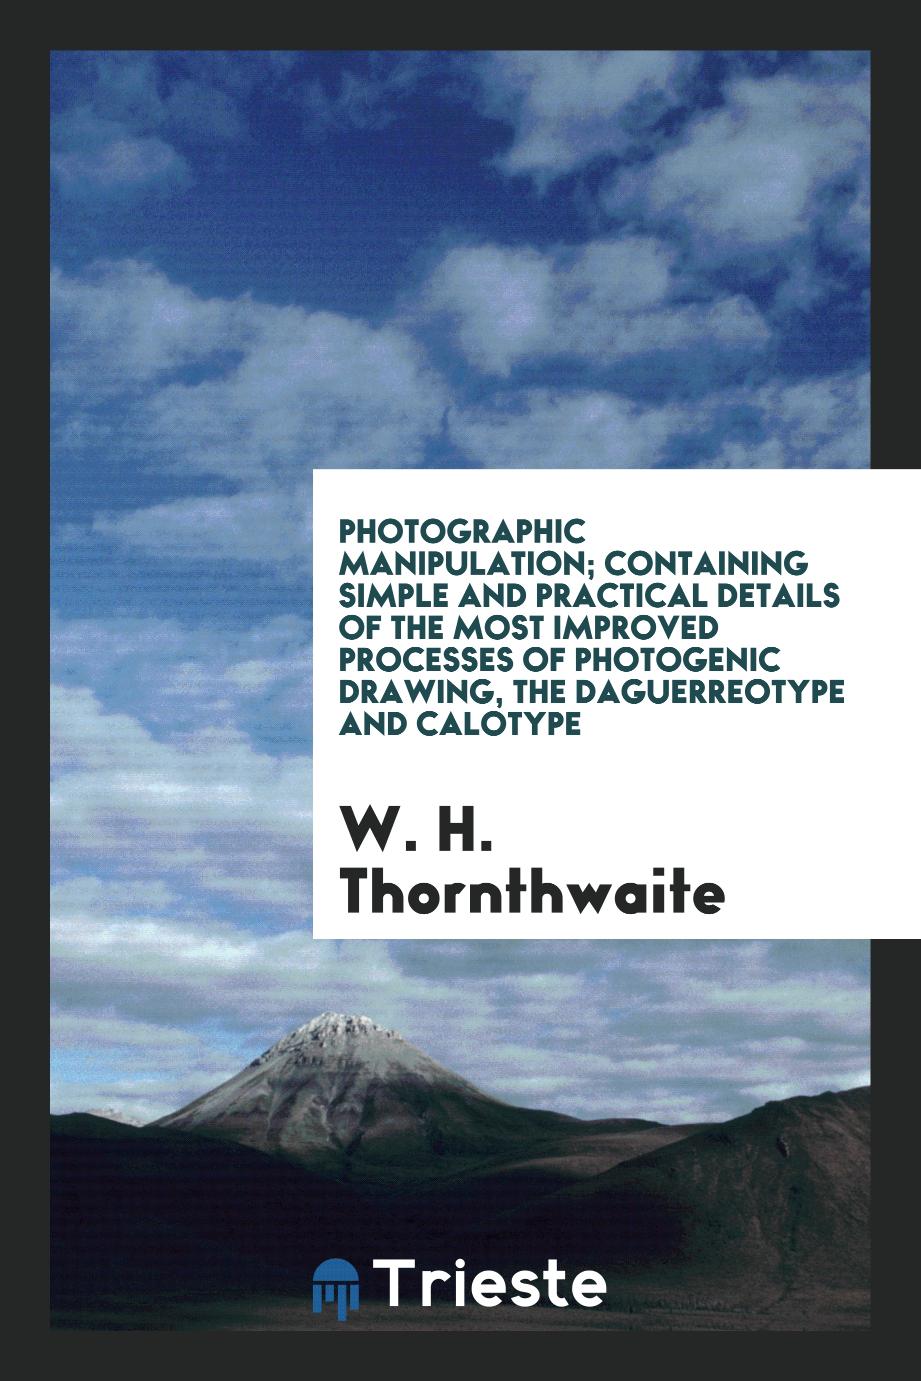 Photographic manipulation; containing simple and practical details of the most improved processes of photogenic drawing, the daguerreotype and calotype